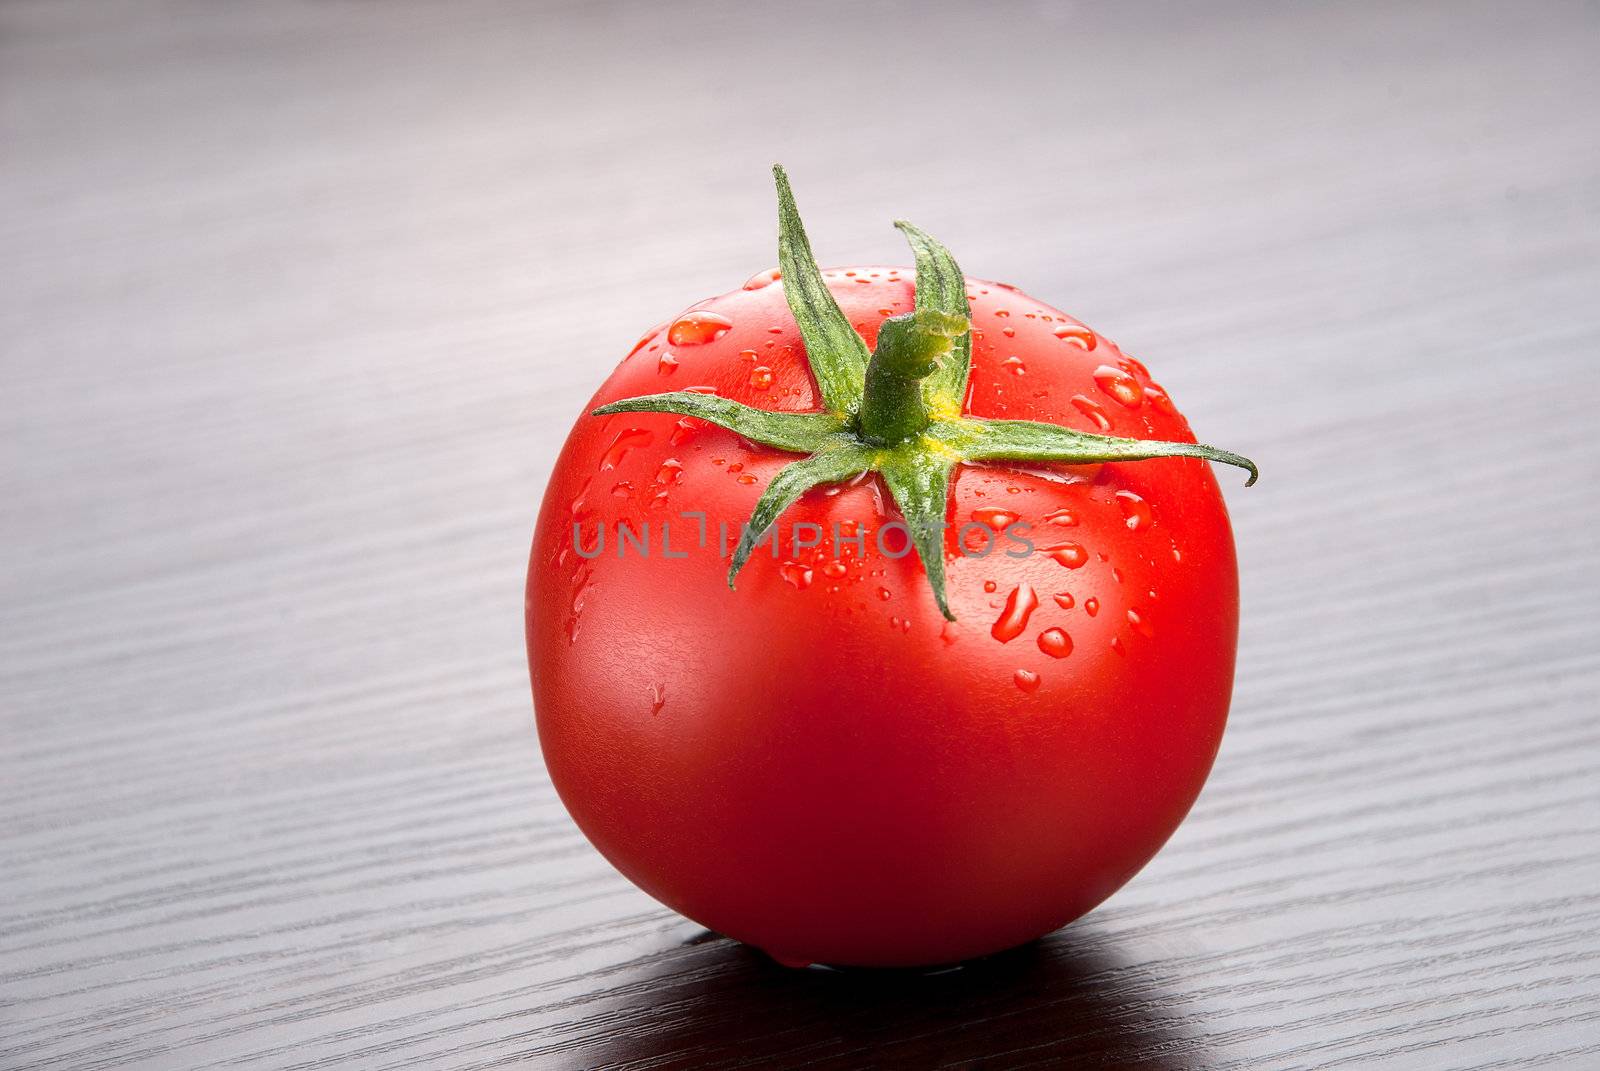 one fresh tomato with drops of water on the wooden background